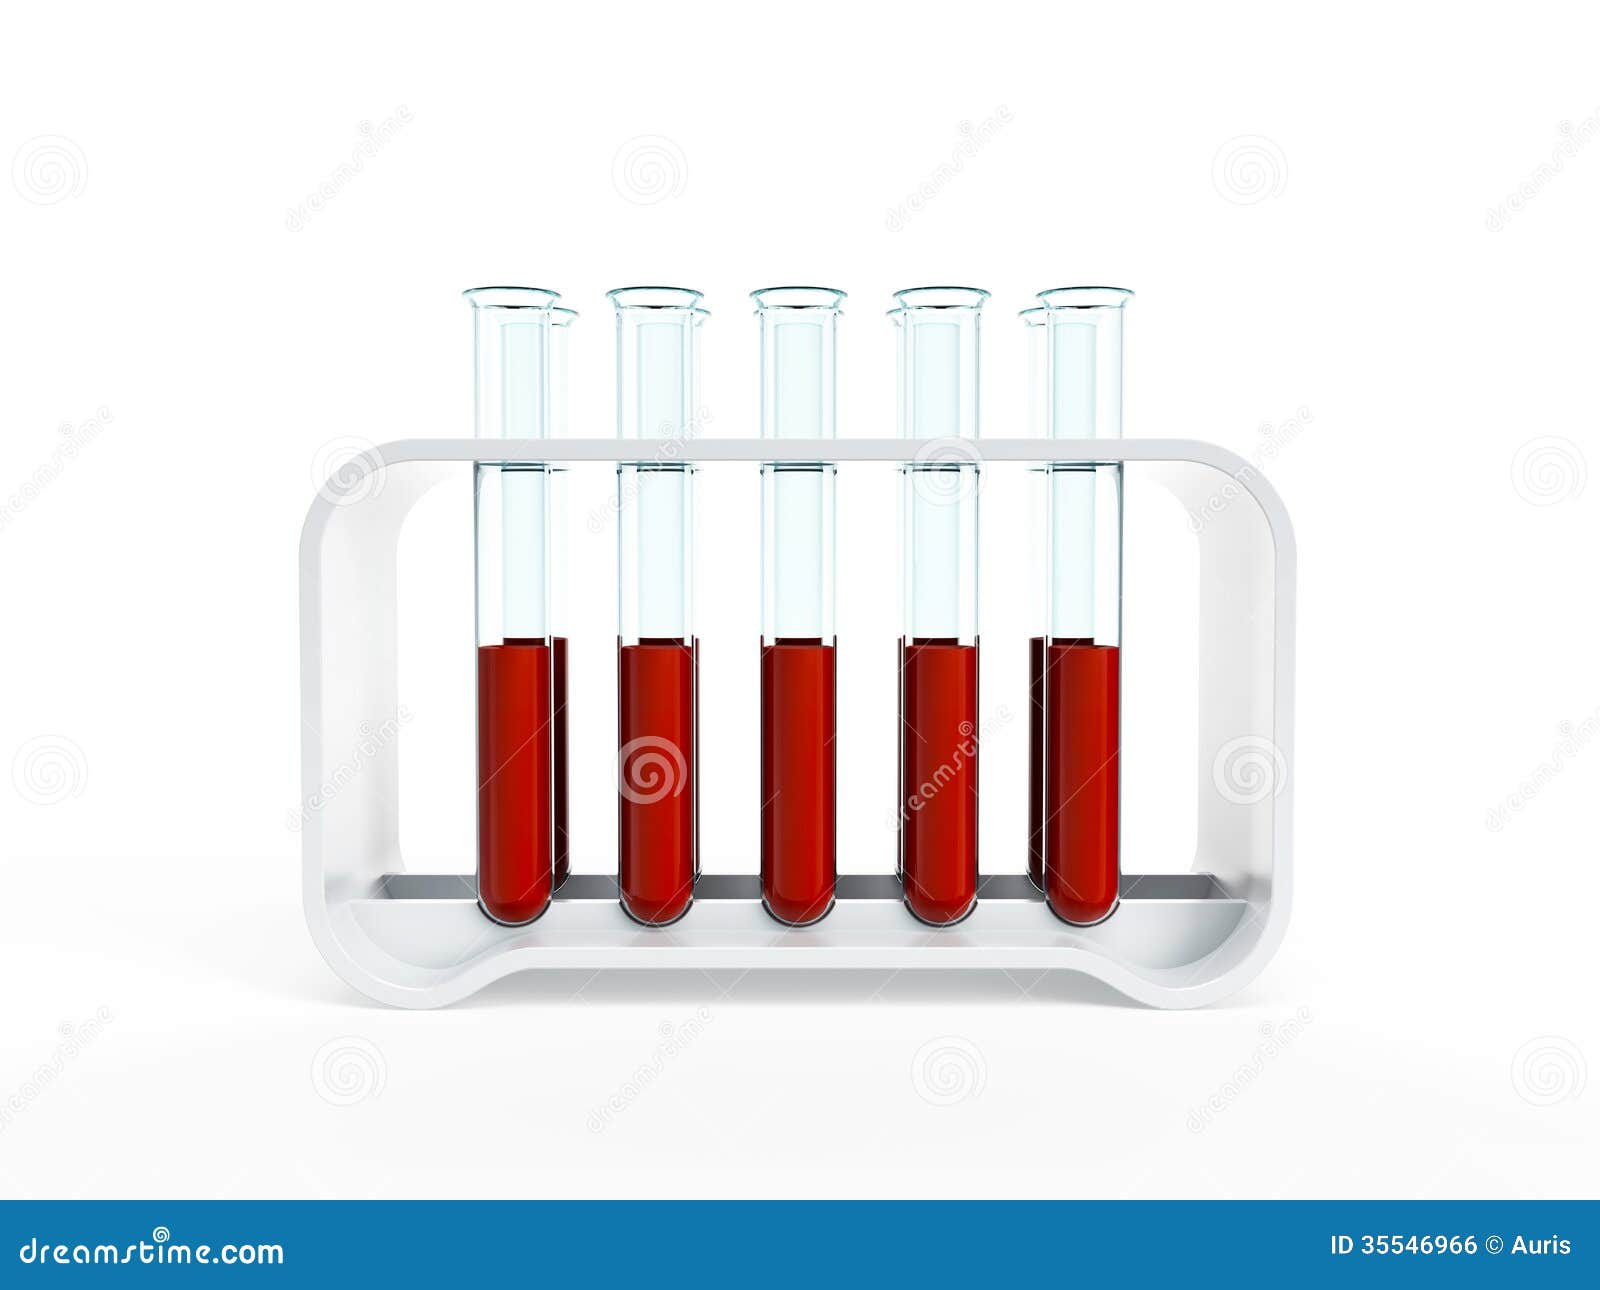 clipart blood sample - photo #3